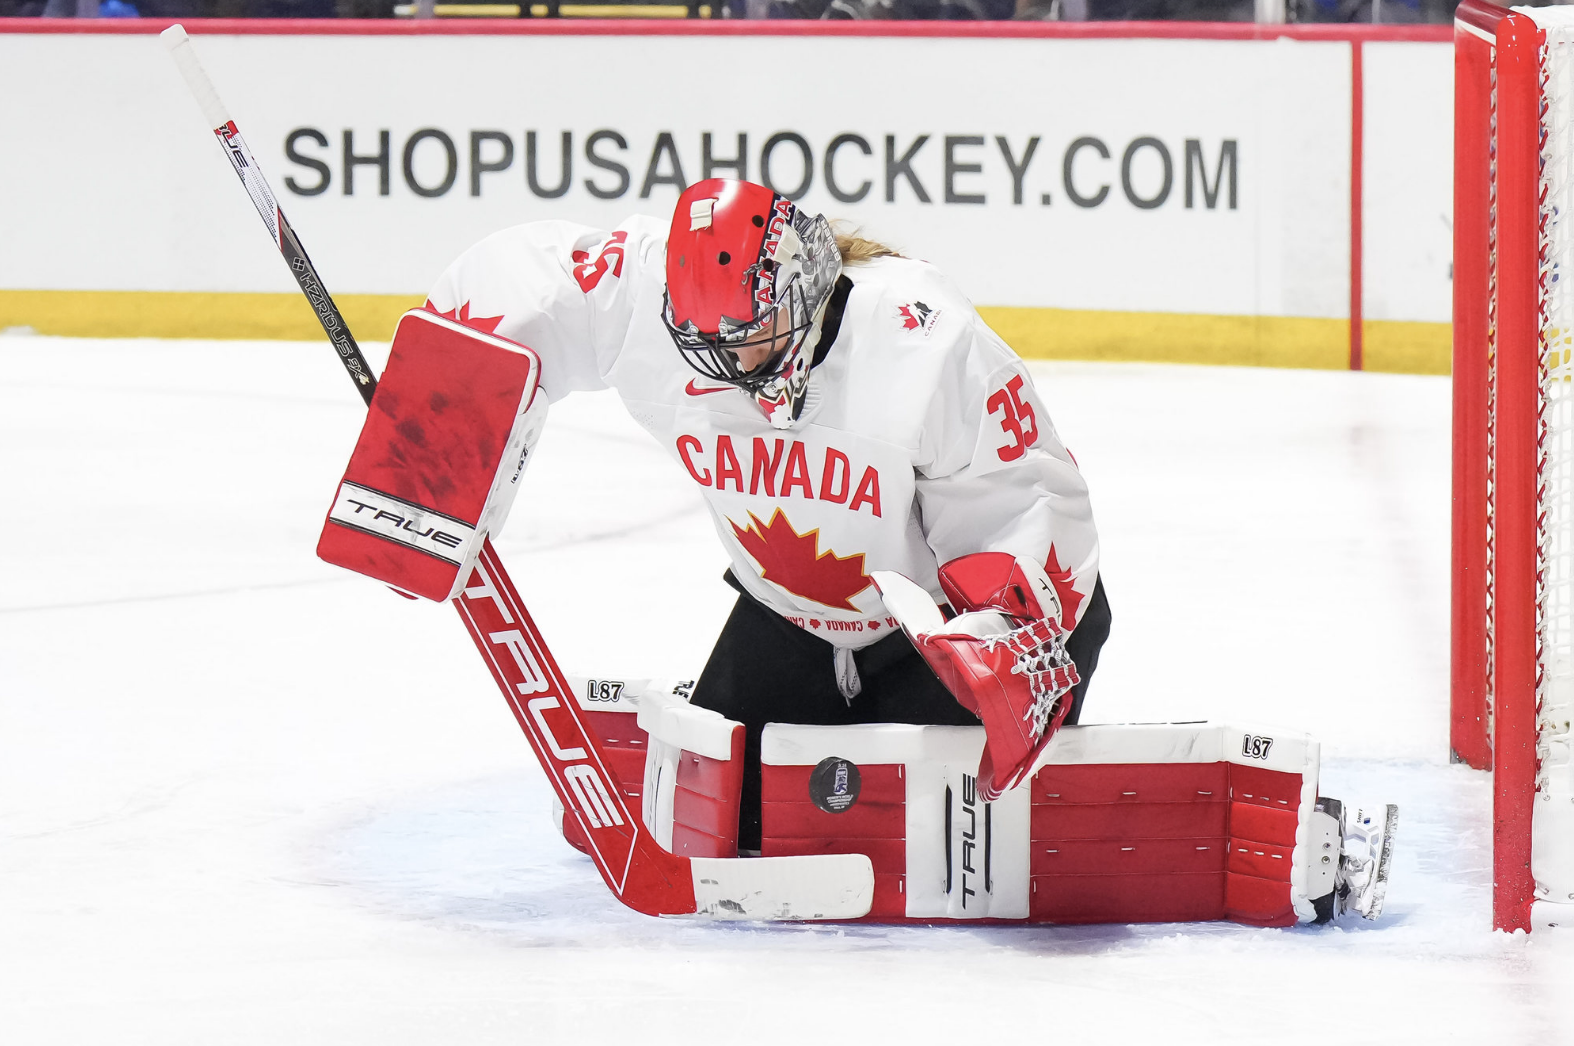 Ann-Renée Desbiens makes a save from the butterfly position. She is looking down at the puck, which is bouncing off her left pad. She is in a white uniform, and red and white Canada-themed goalie gear, including her mask.